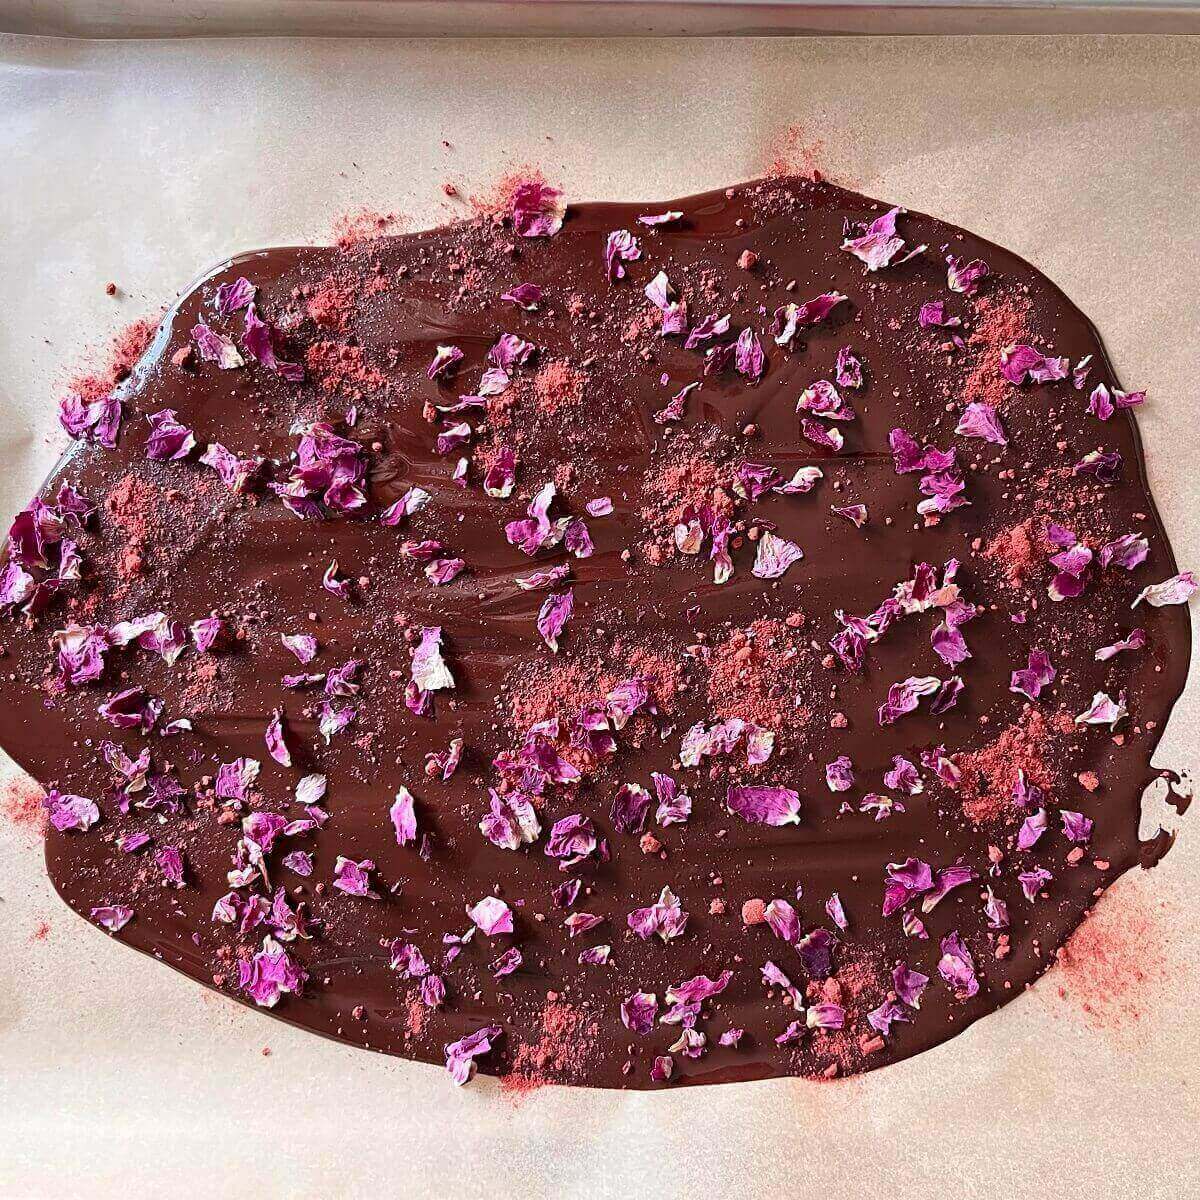 Melted chocolate spread on a sheet pan lined with parchment paper and topped with dried rose petals and strawberry powder.